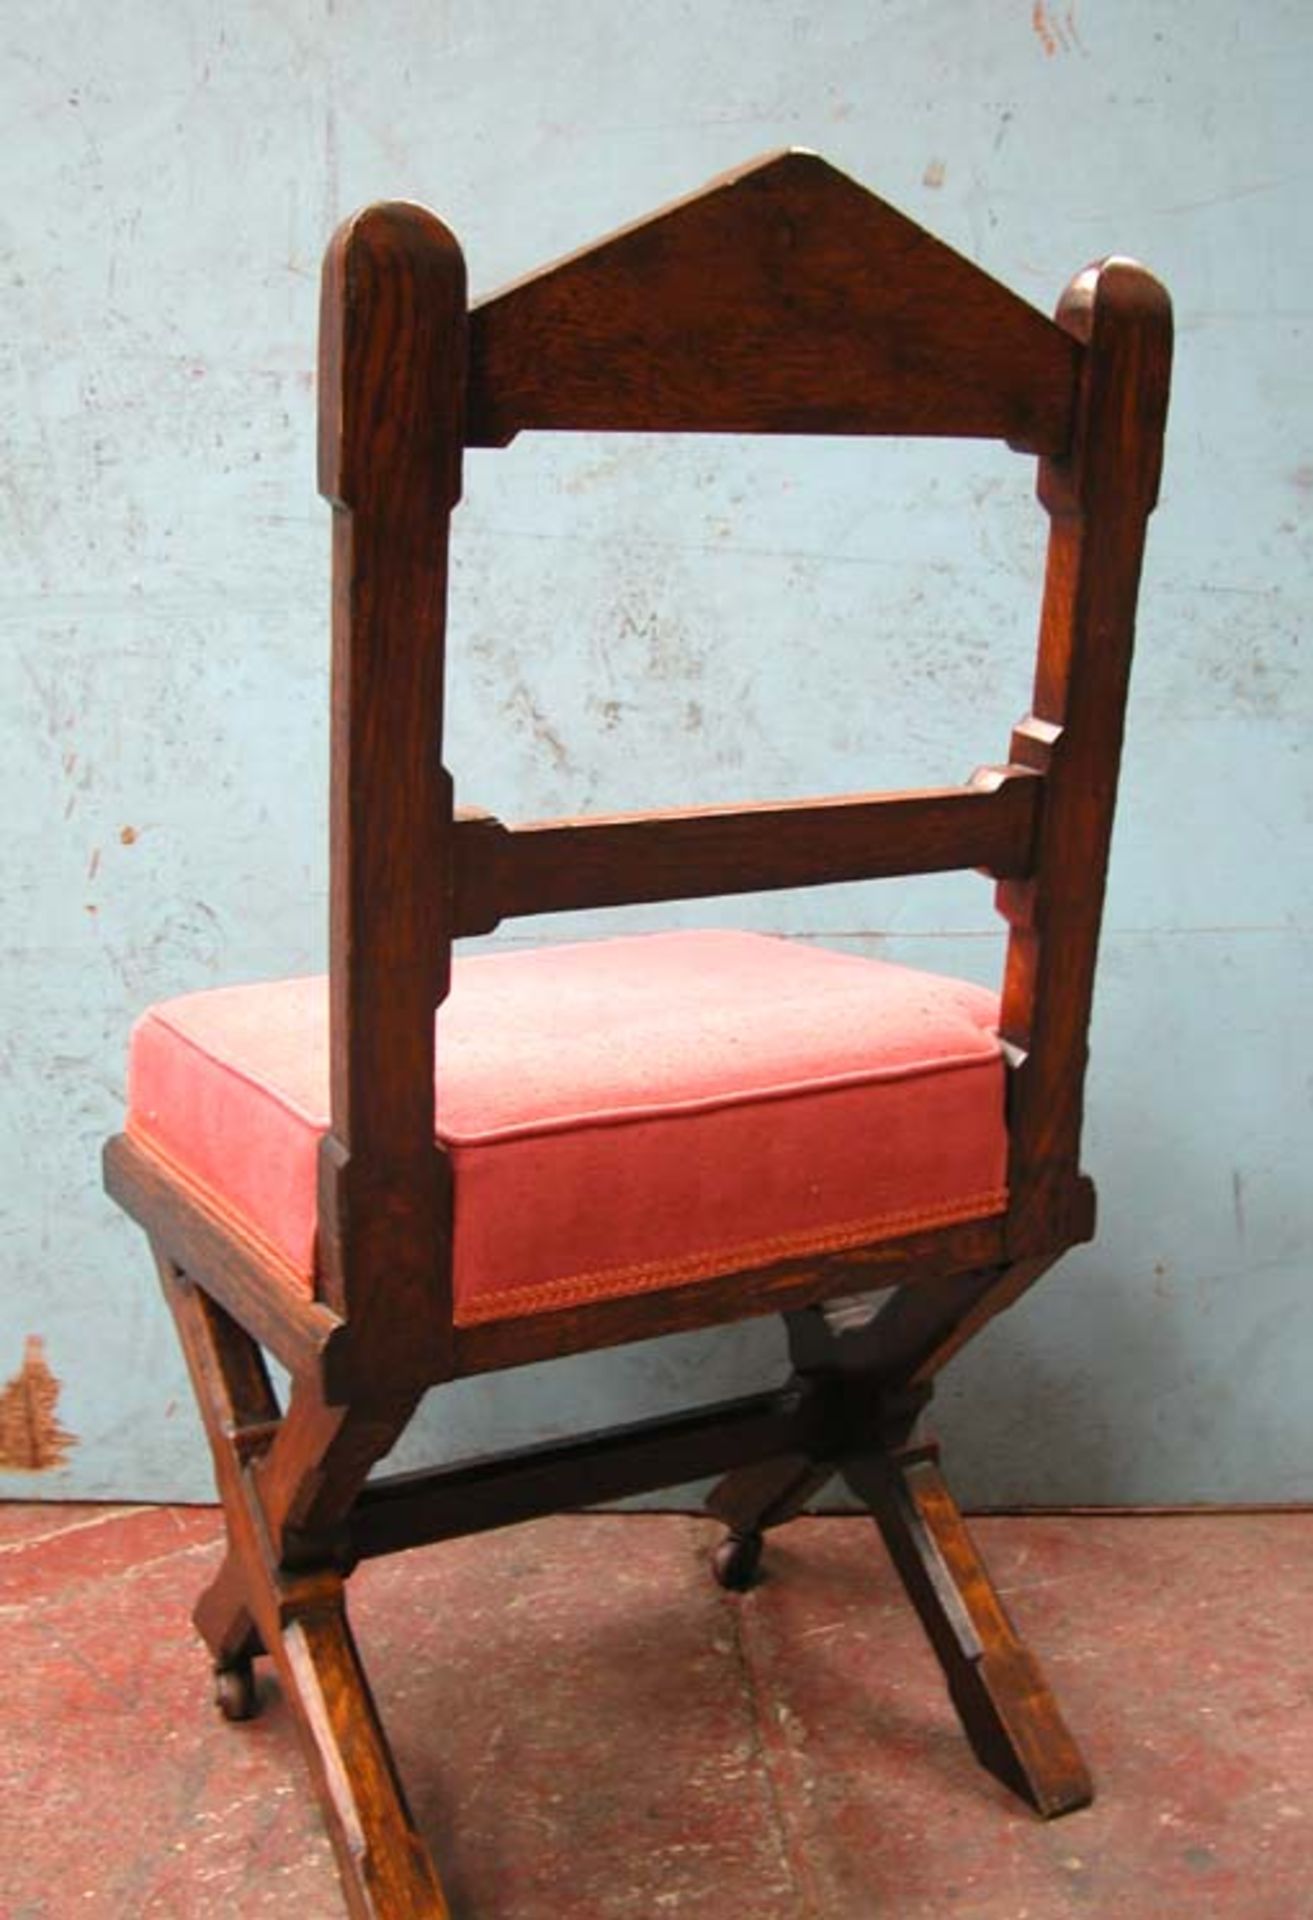 *SET OF FOUR OAK CHAIRS WITH GOTHIC DETAILS, CIRCA 1880. 920MM (36IN) HIGH X 475MM (18.75IN) WIDE - Image 6 of 6